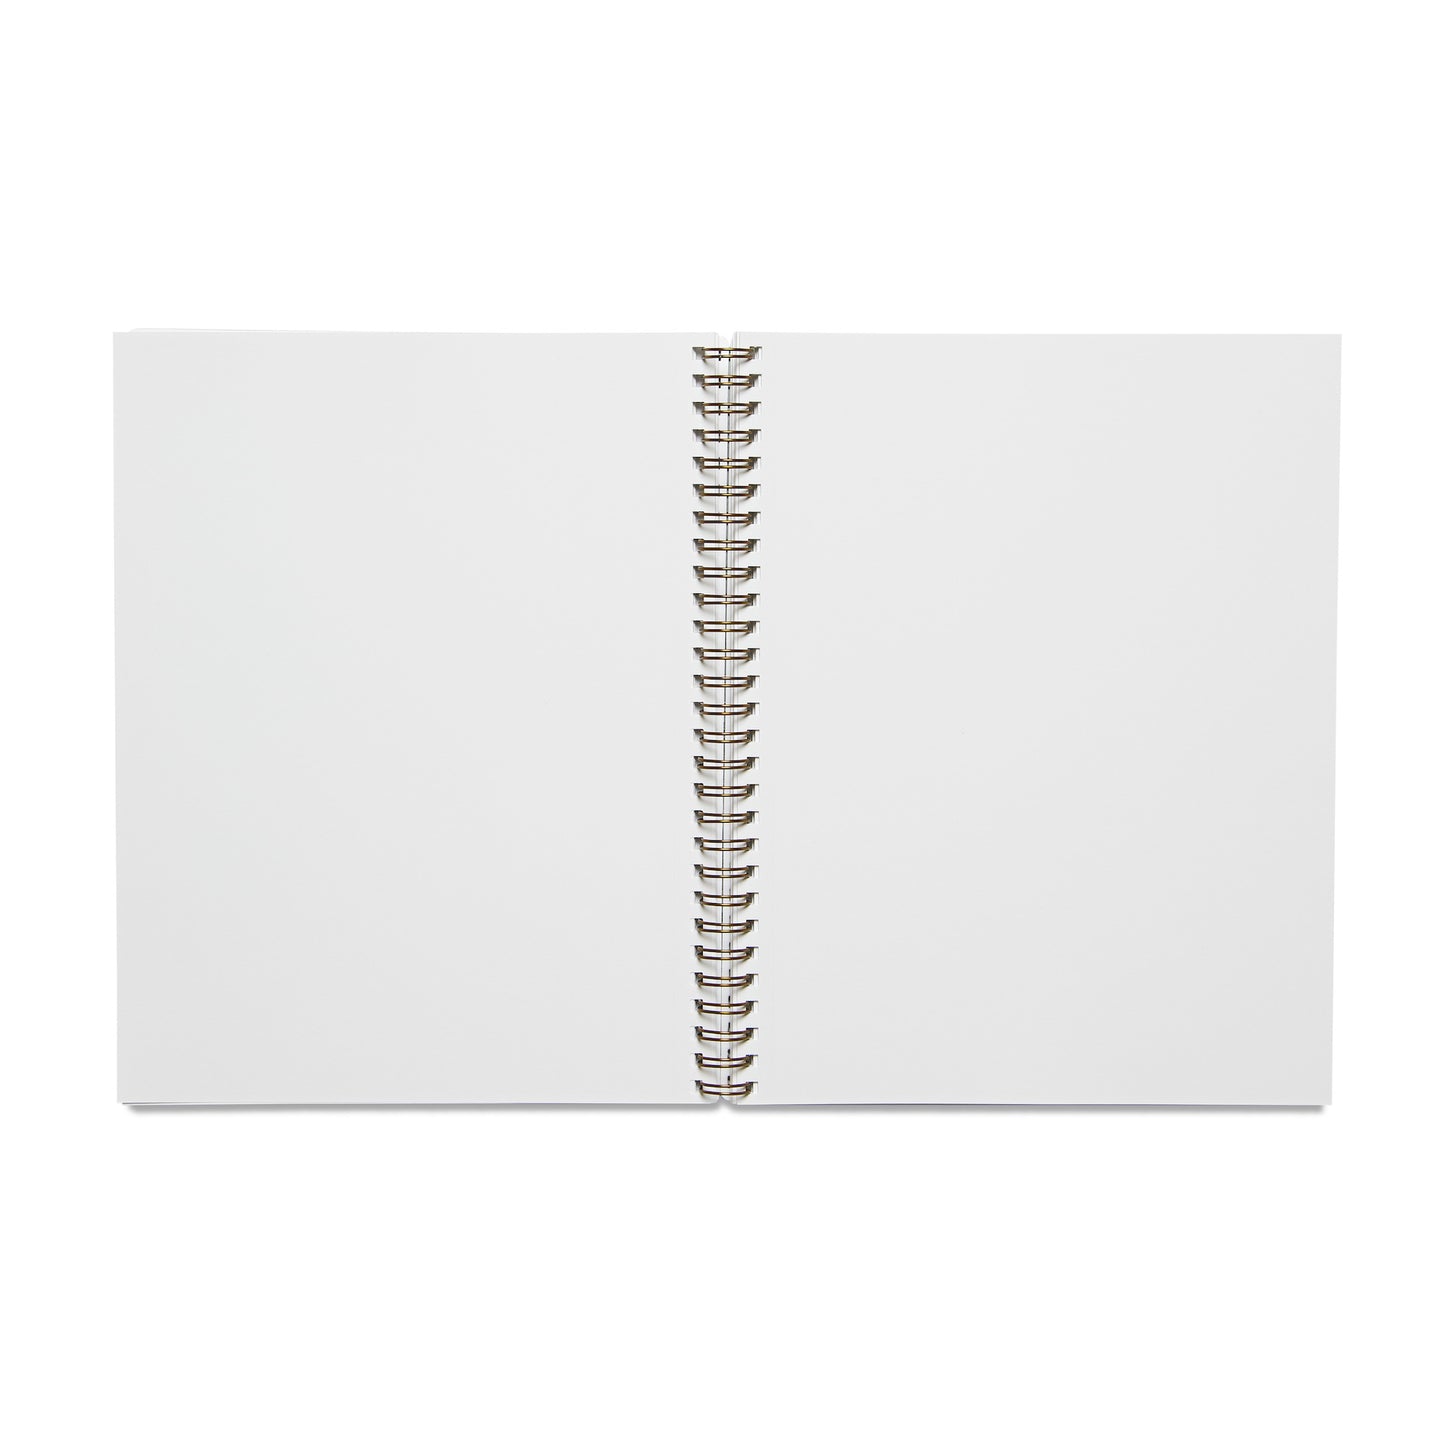 Hotel Saint Cecilia Chambray Notebook x Appointed Co.